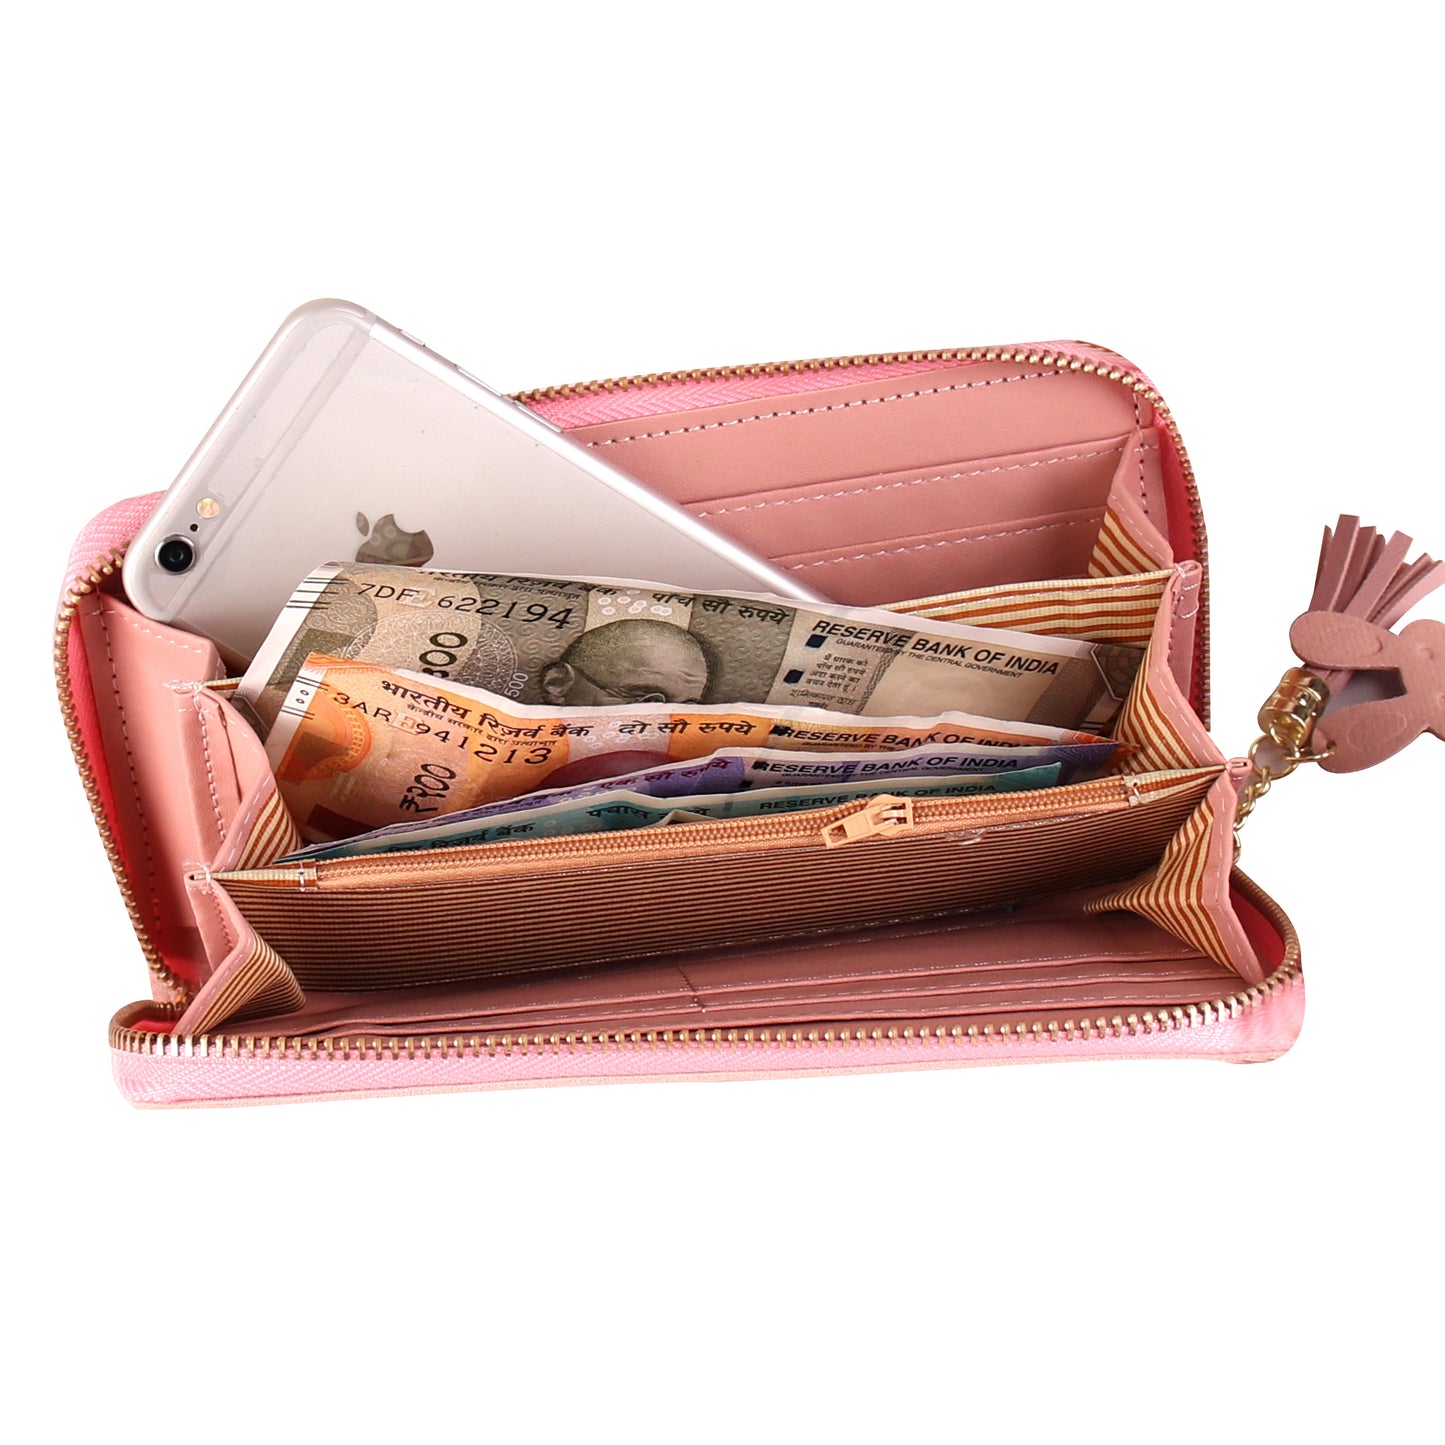 Wallet,The Envelope Wallet in shades of Pink - Cippele Multi Store